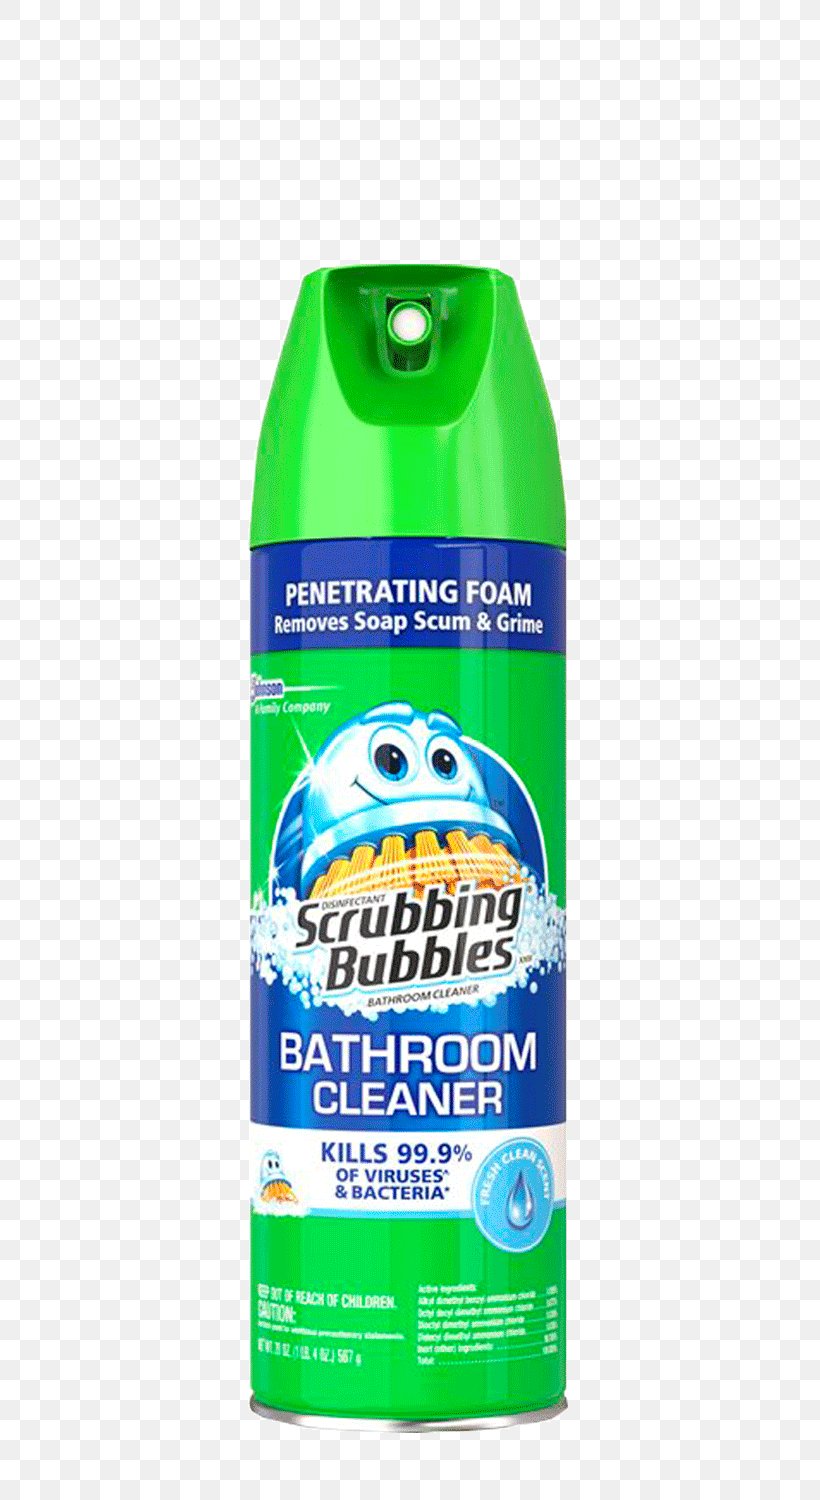 Toilet Cleaner Scrubbing Bubbles Bathroom Cleaning Bathtub, PNG, 540x1500px, Toilet Cleaner, Bathroom, Bathtub, Cleaner, Cleaning Download Free